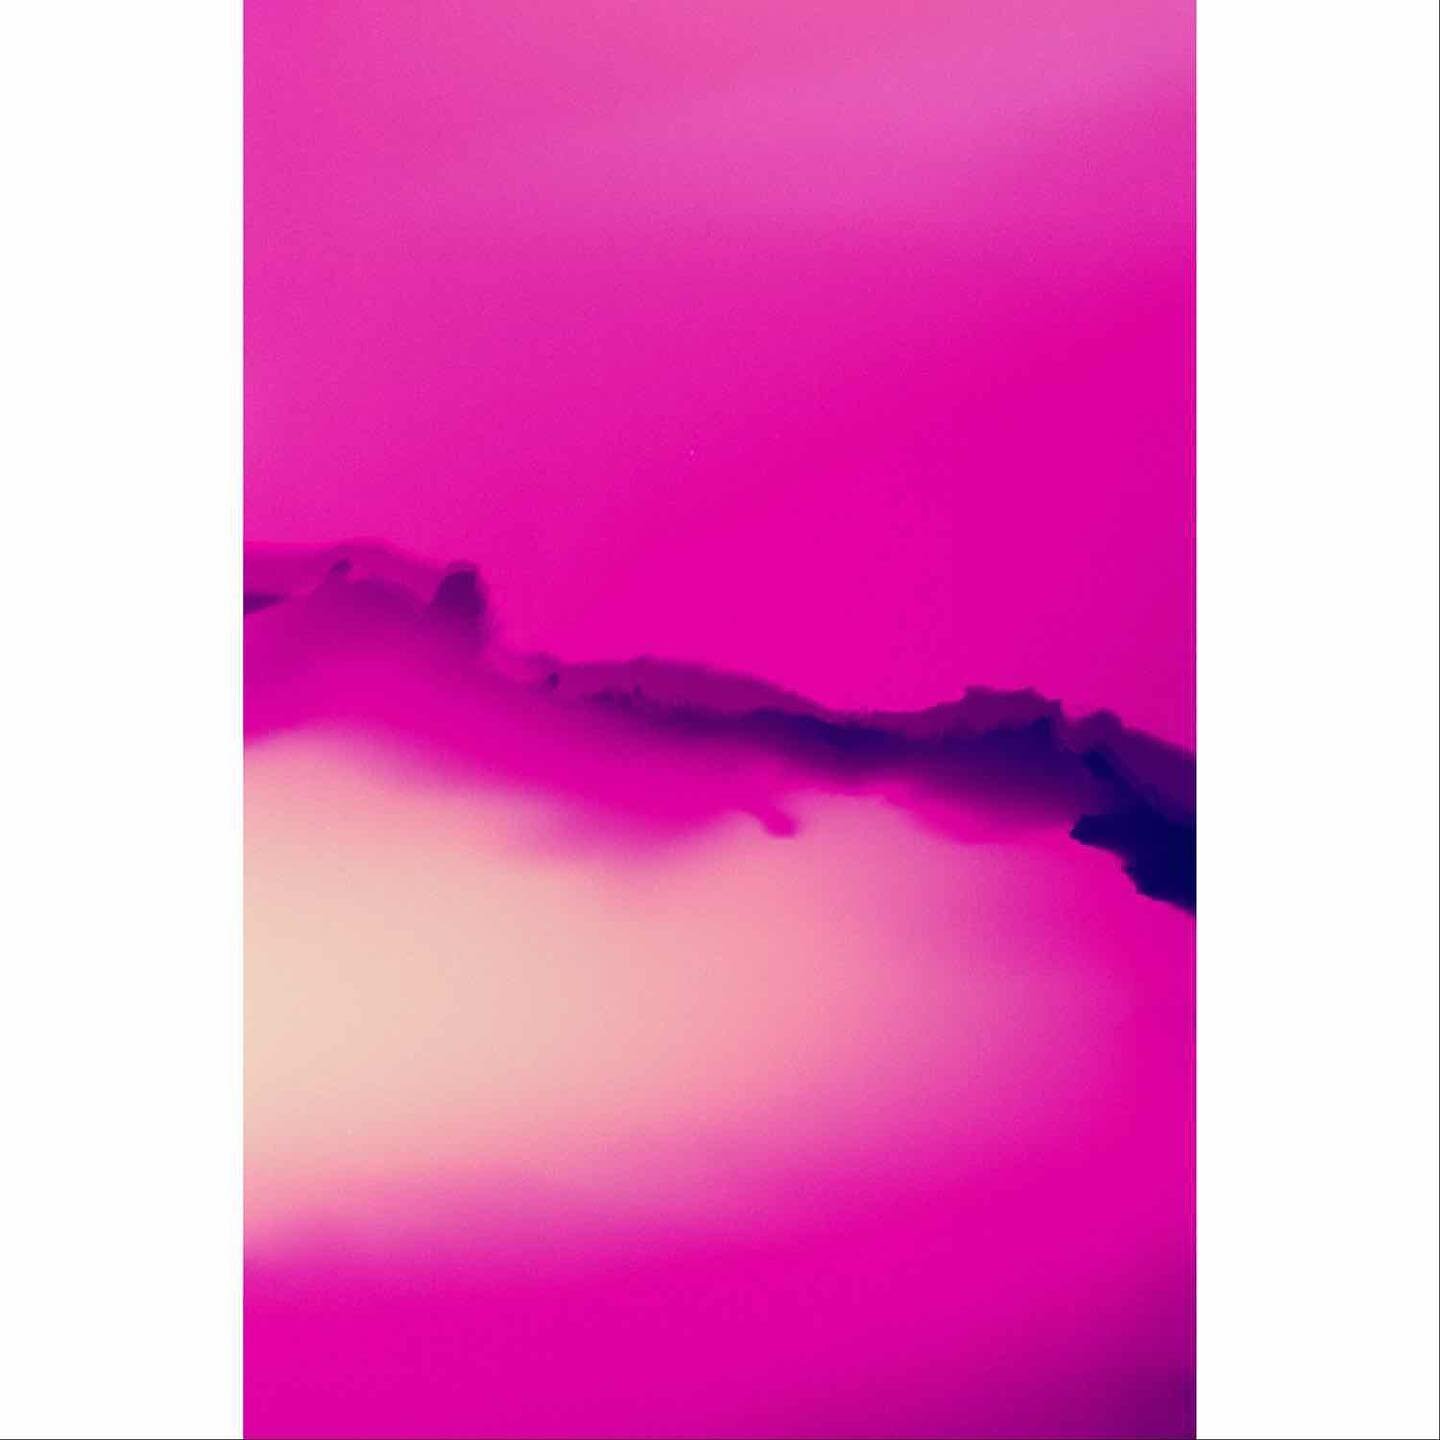 &ldquo;Imagined Landscape #21,&rdquo; 2020. I&rsquo;m excited to share some new work made with an old homemade camera. 
.
.
.
.
.
.
#alternativeprocesses #antiquatedphotography #landscape #landscapephotography #landscapeart #colorfilm #earth #poetry 